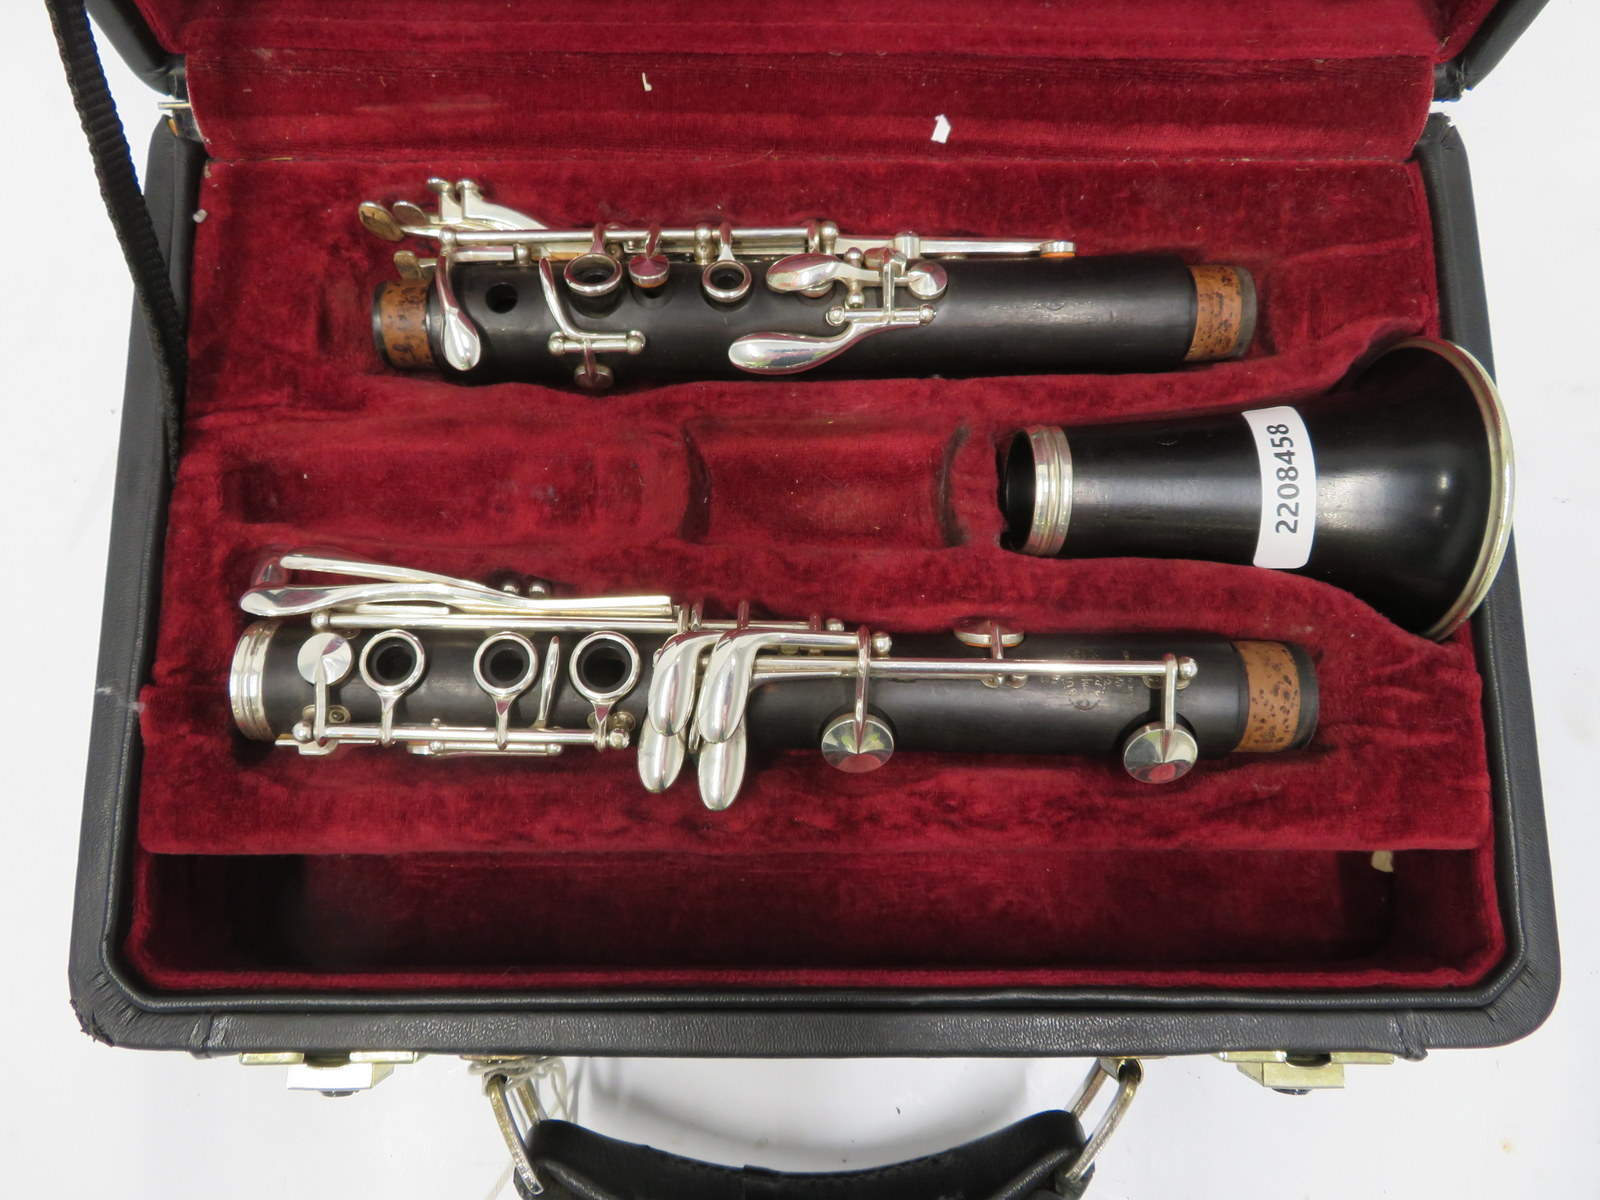 Buffet Crampon clarinet with case. Serial number: 466535. - Image 2 of 12